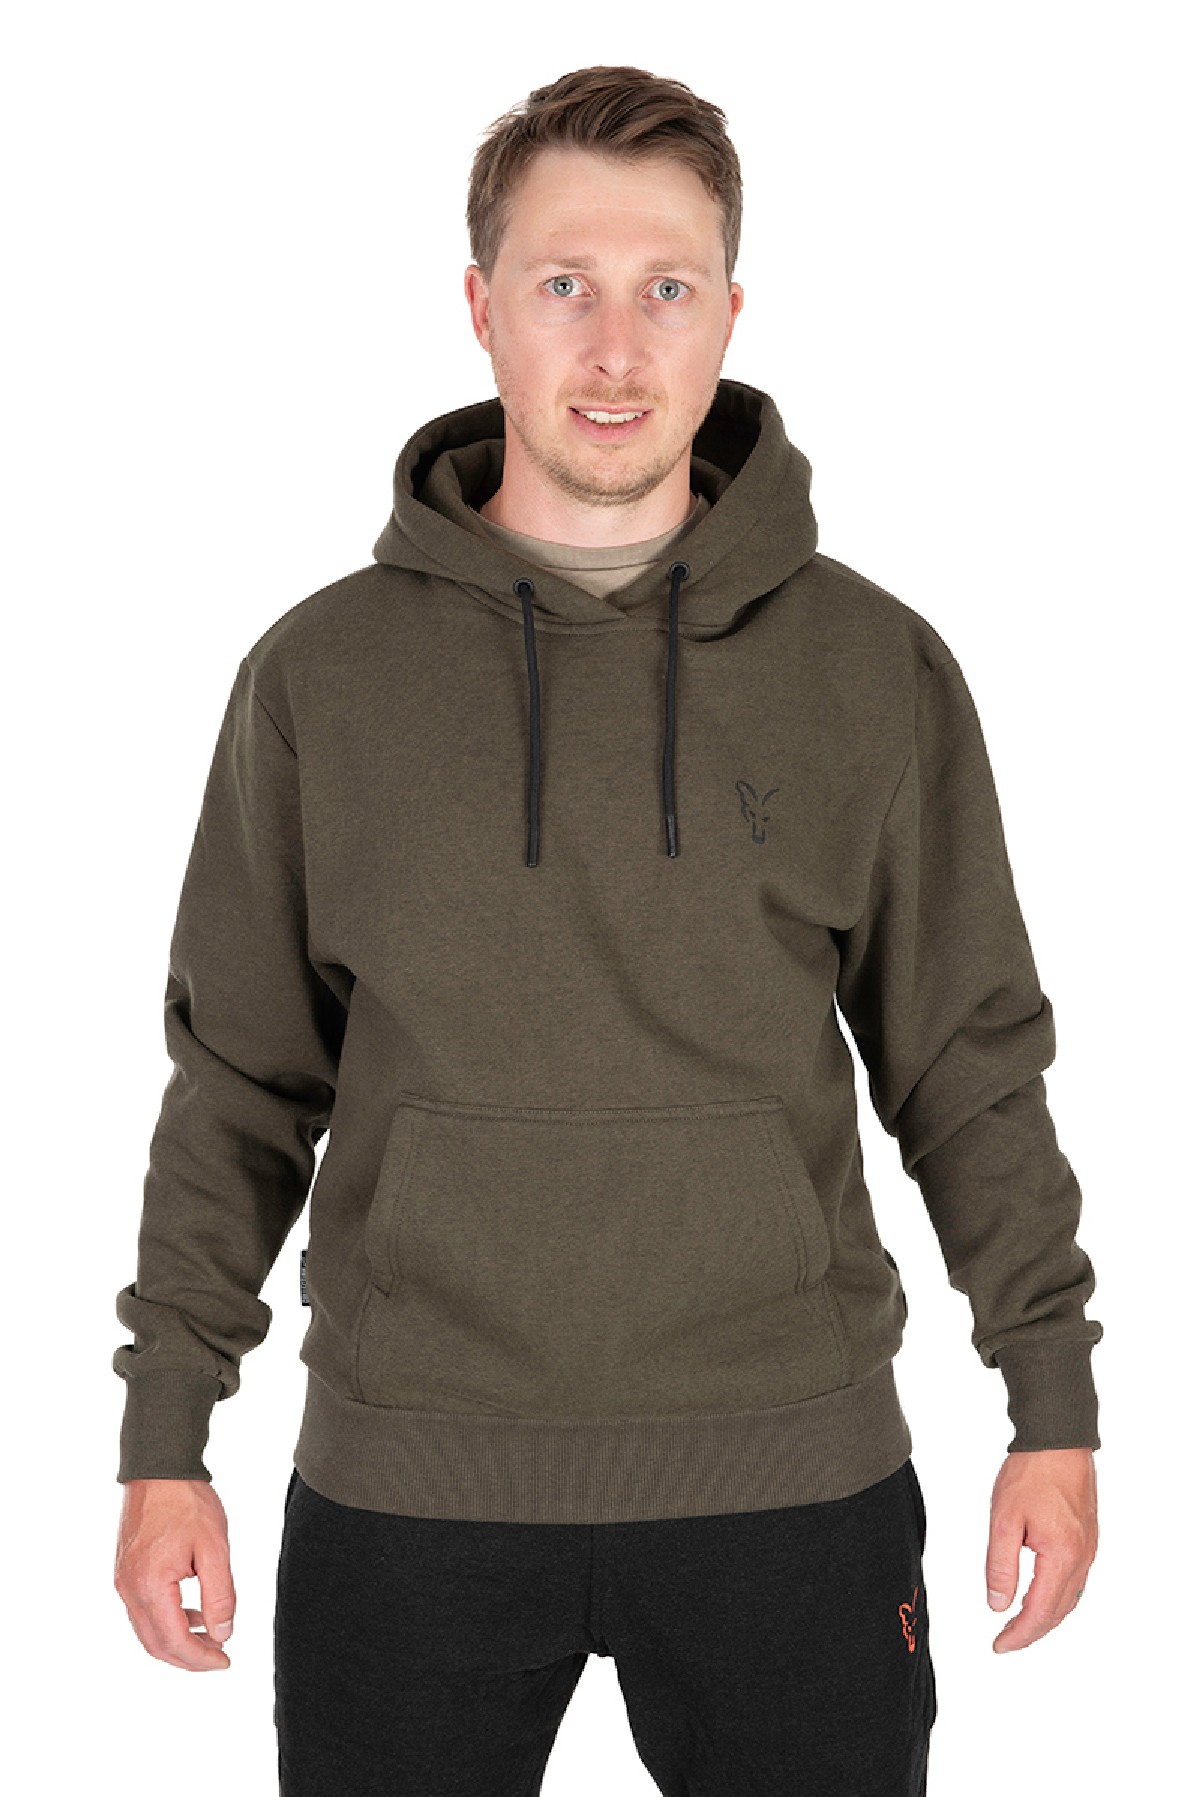 Fox Collection Hoody Green & Black Large